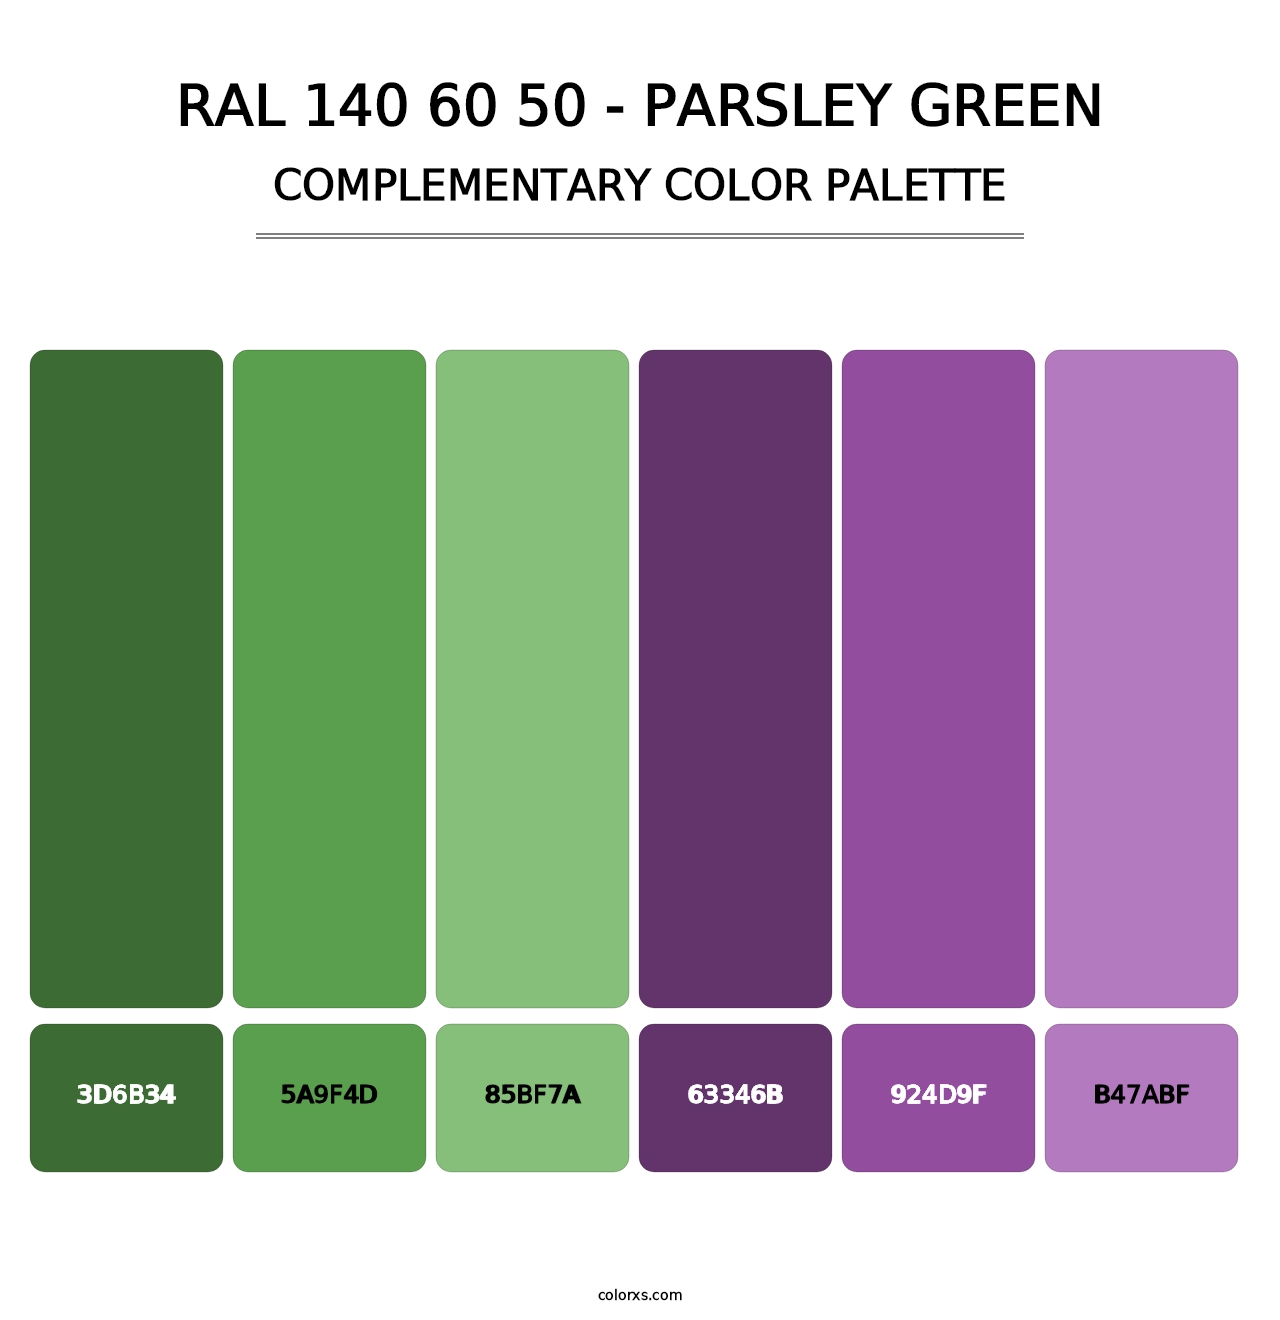 RAL 140 60 50 - Parsley Green - Complementary Color Palette